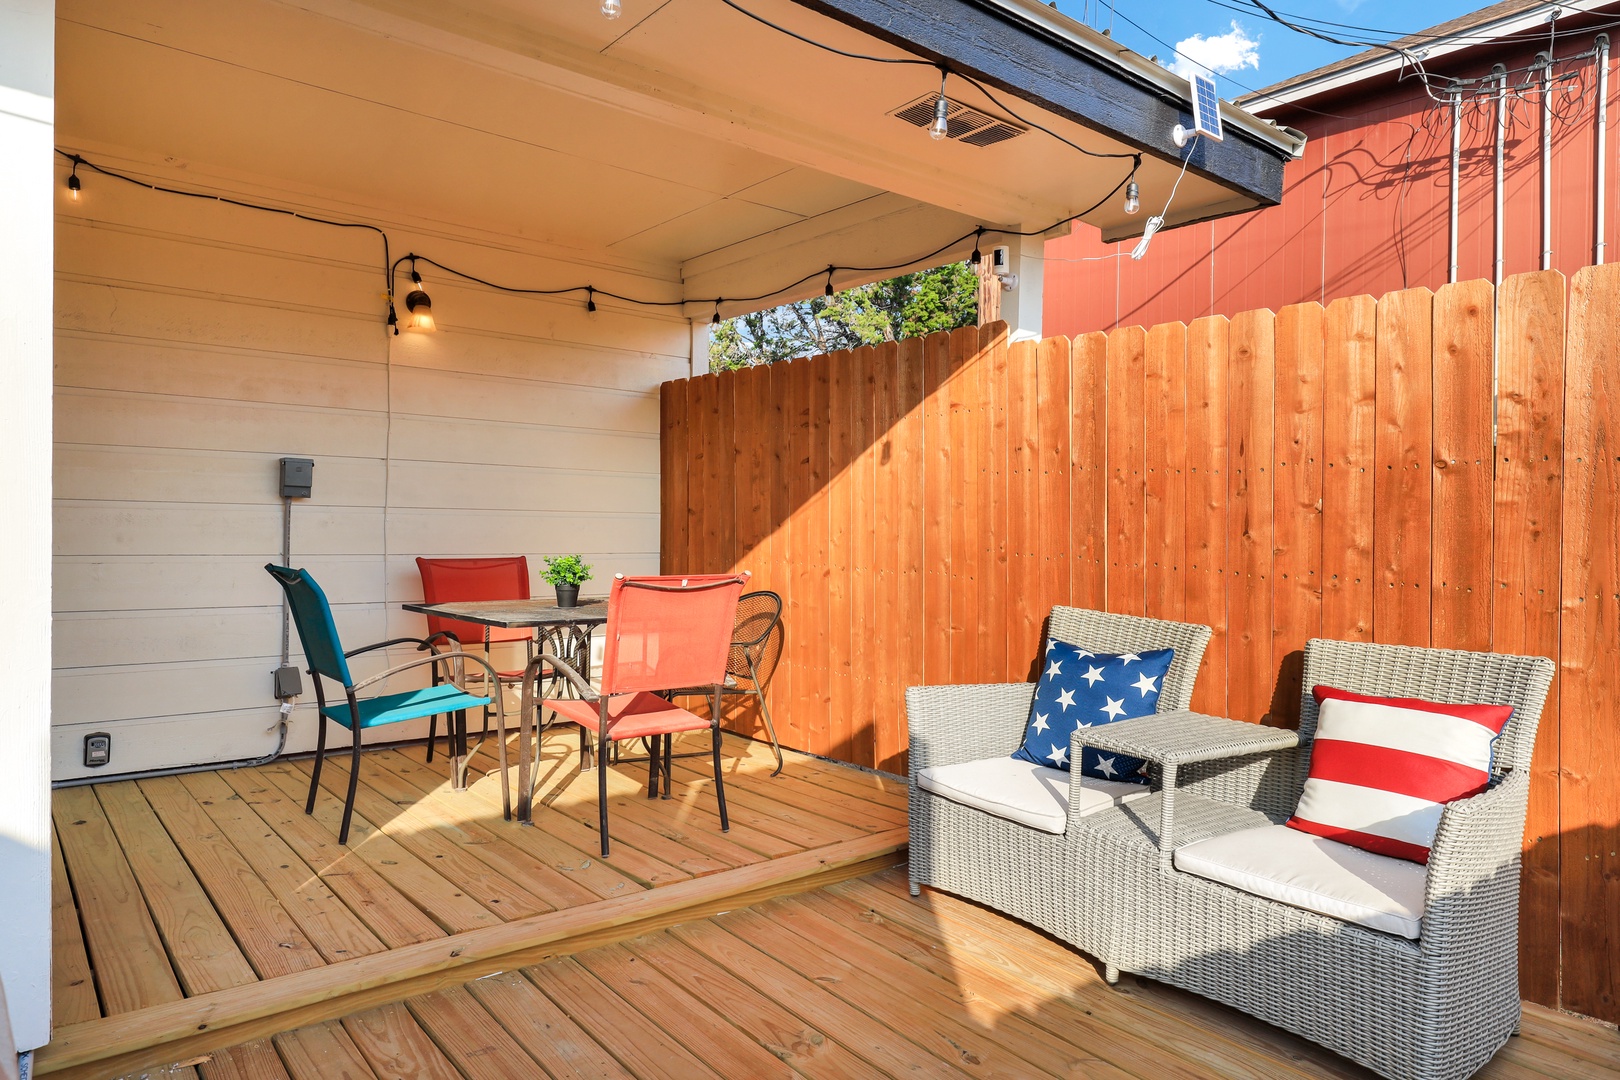 Head out to the patio to lounge & unwind in the bubbling hot tub